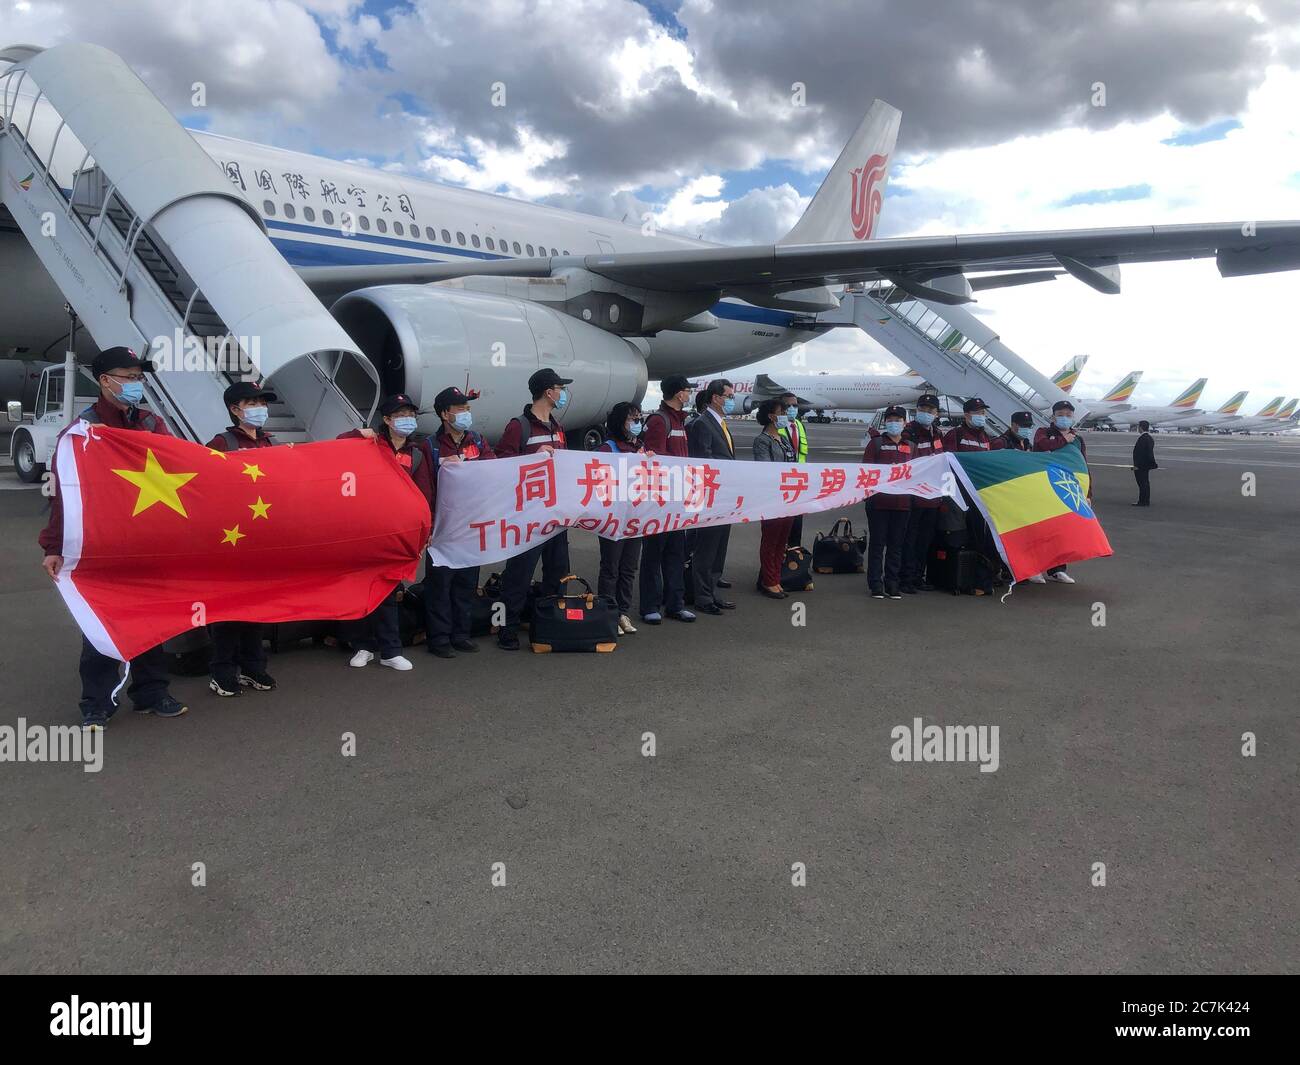 (200718) -- NAIROBI, July 18, 2020 (Xinhua) -- Members of a Chinese medical team pose for a photo upon their arrival at the airport in Addis Ababa, Ethiopia, April 16, 2020. (Xinhua/Wang Shoubao) Stock Photo